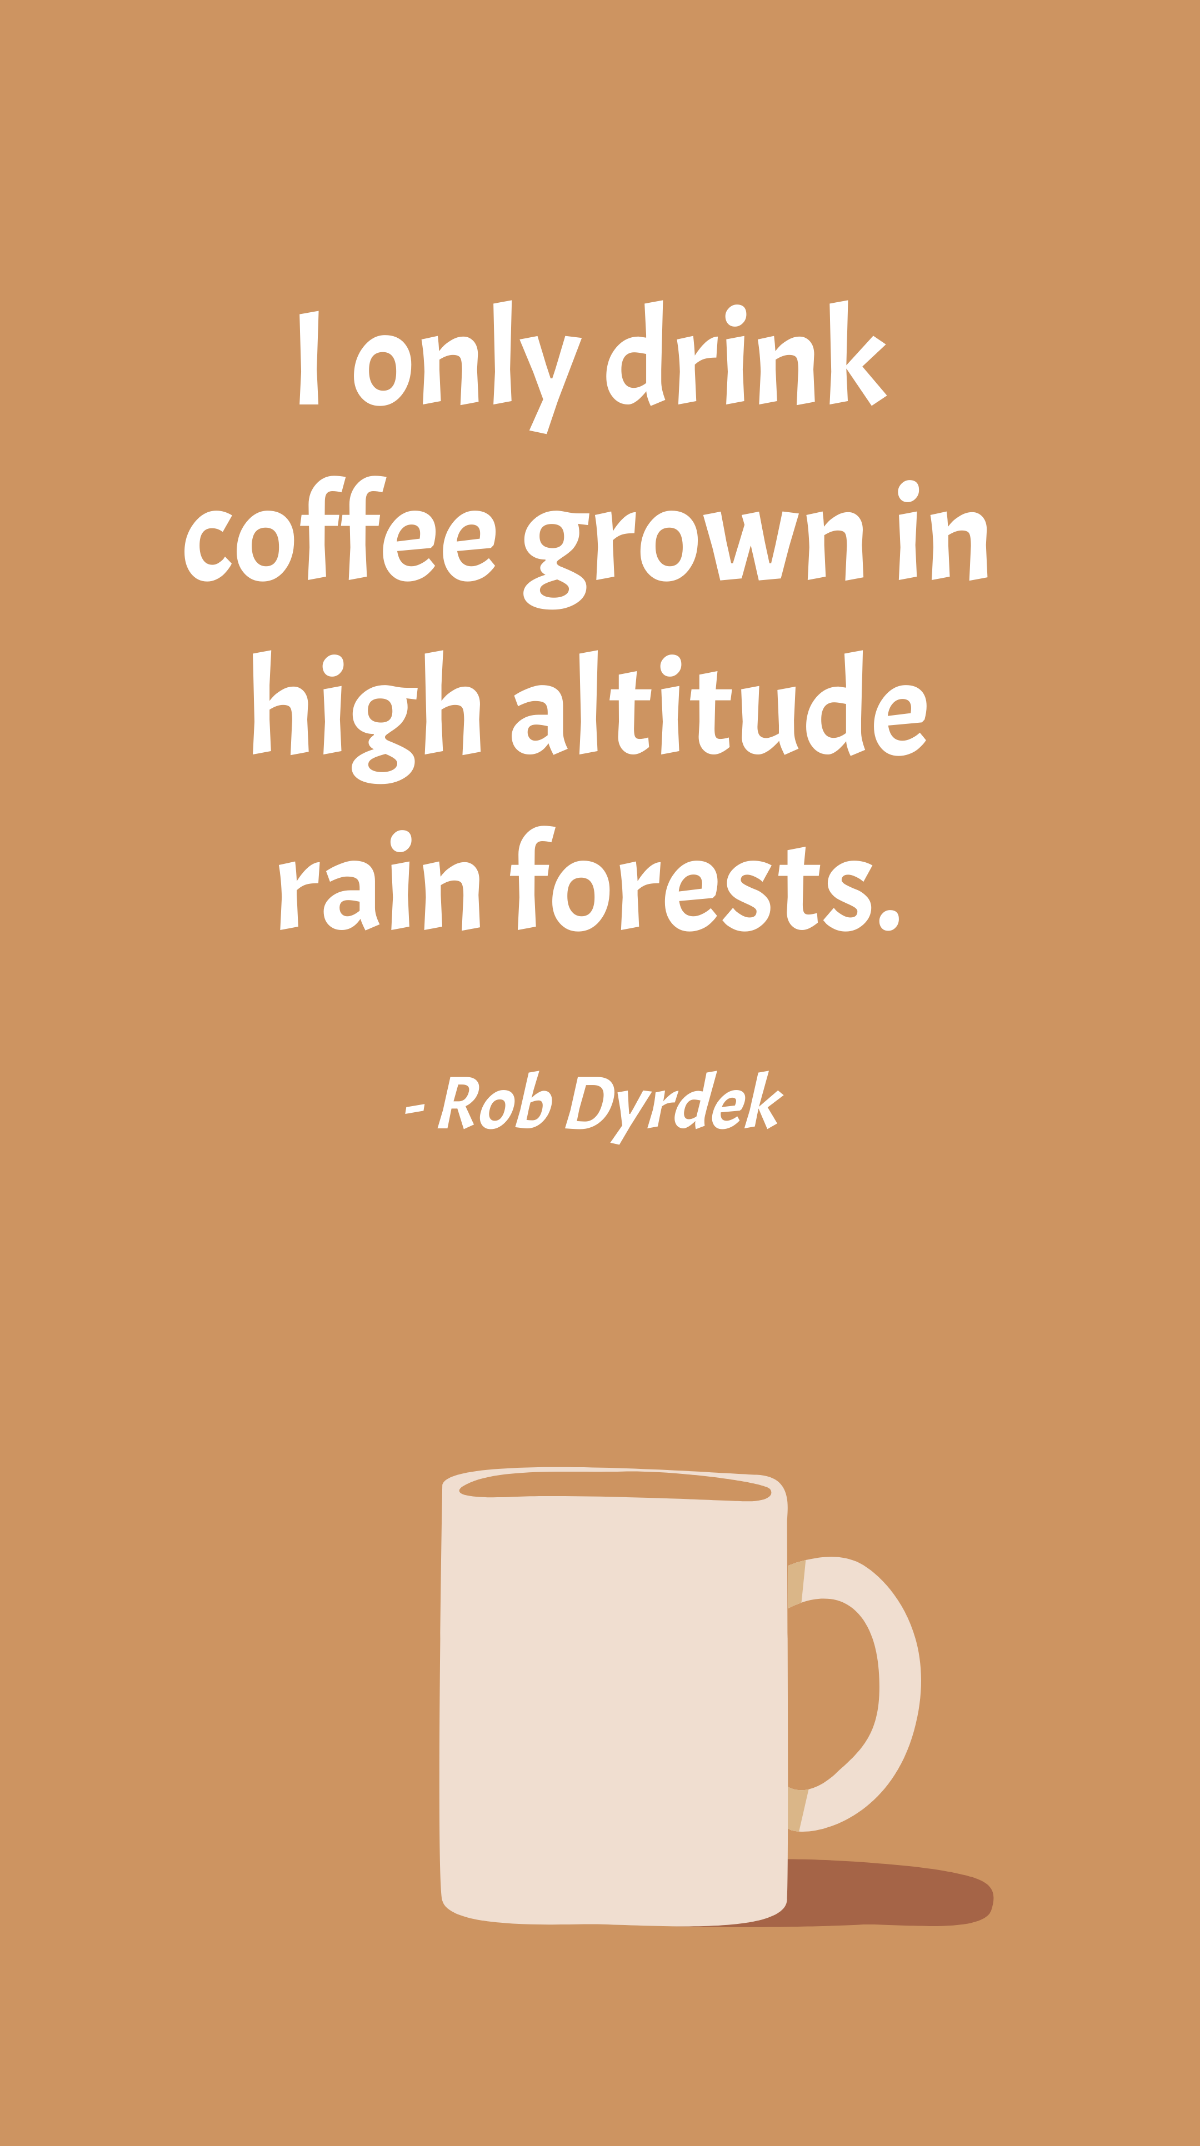 Rob Dyrdek - I only drink coffee grown in high altitude rain forests. Template